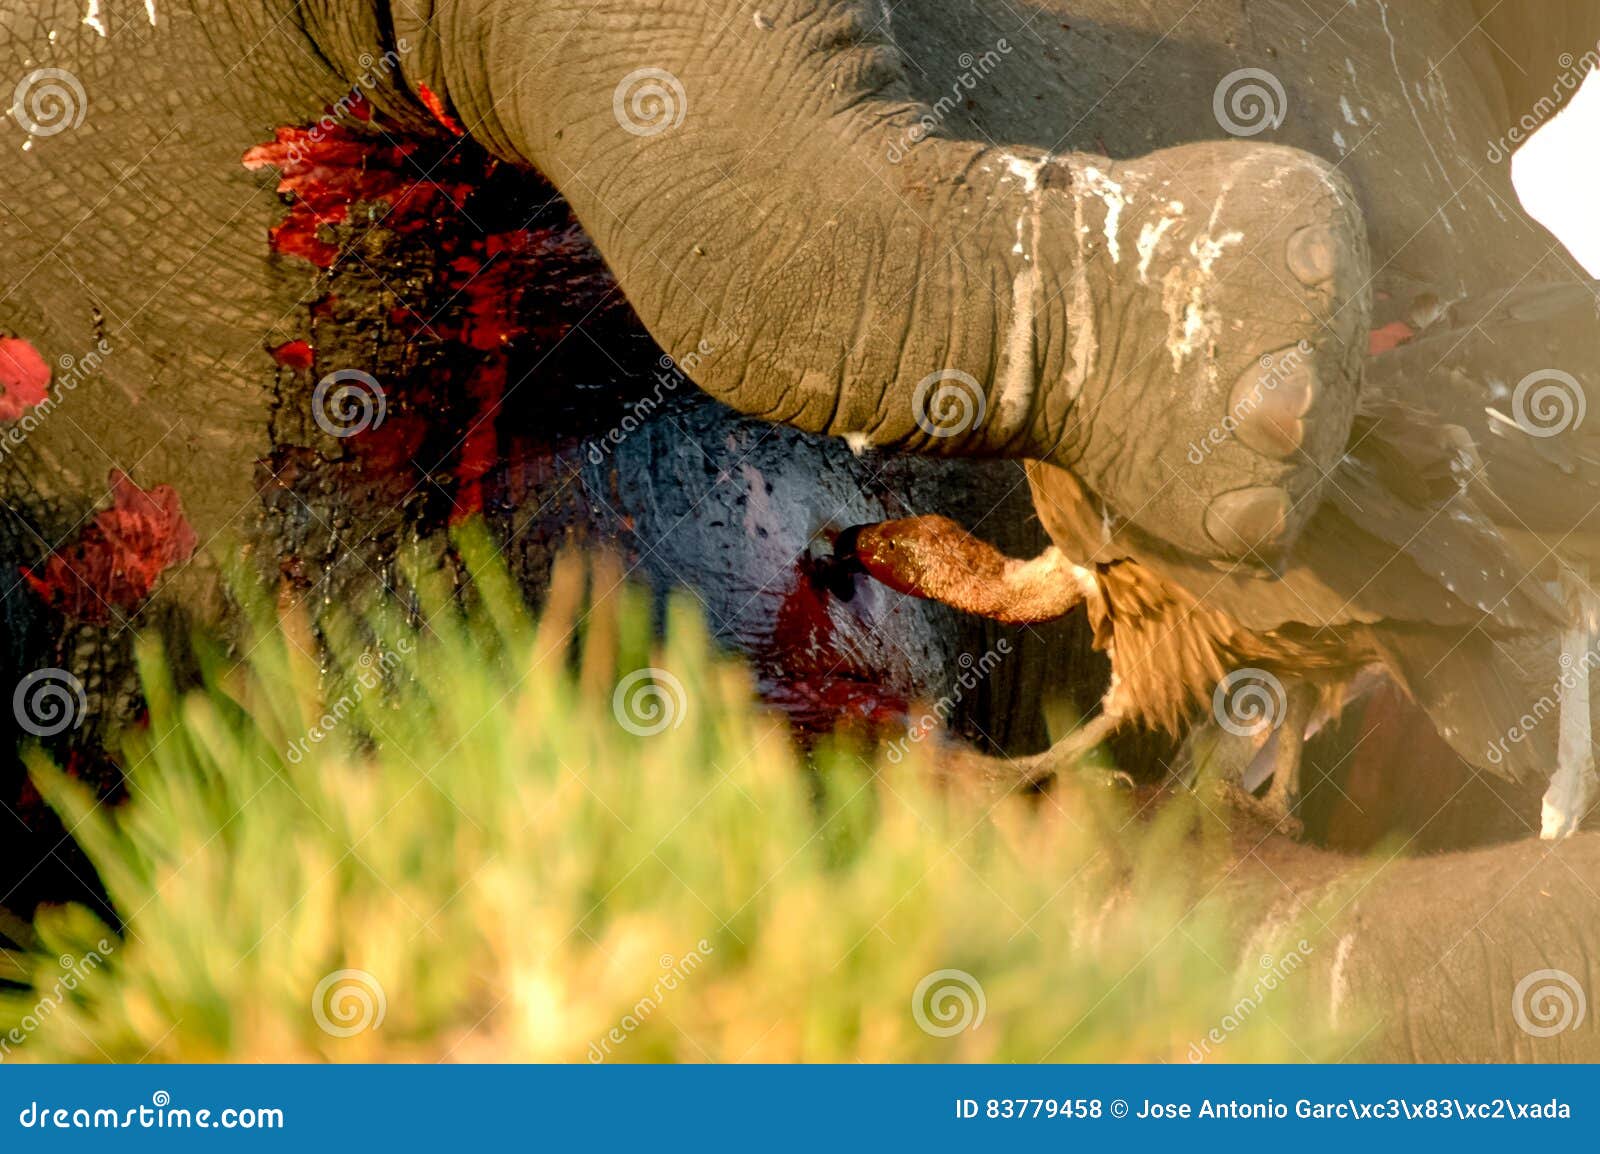 Vulture attack Elephant stock photo. Image of animals - 83779458